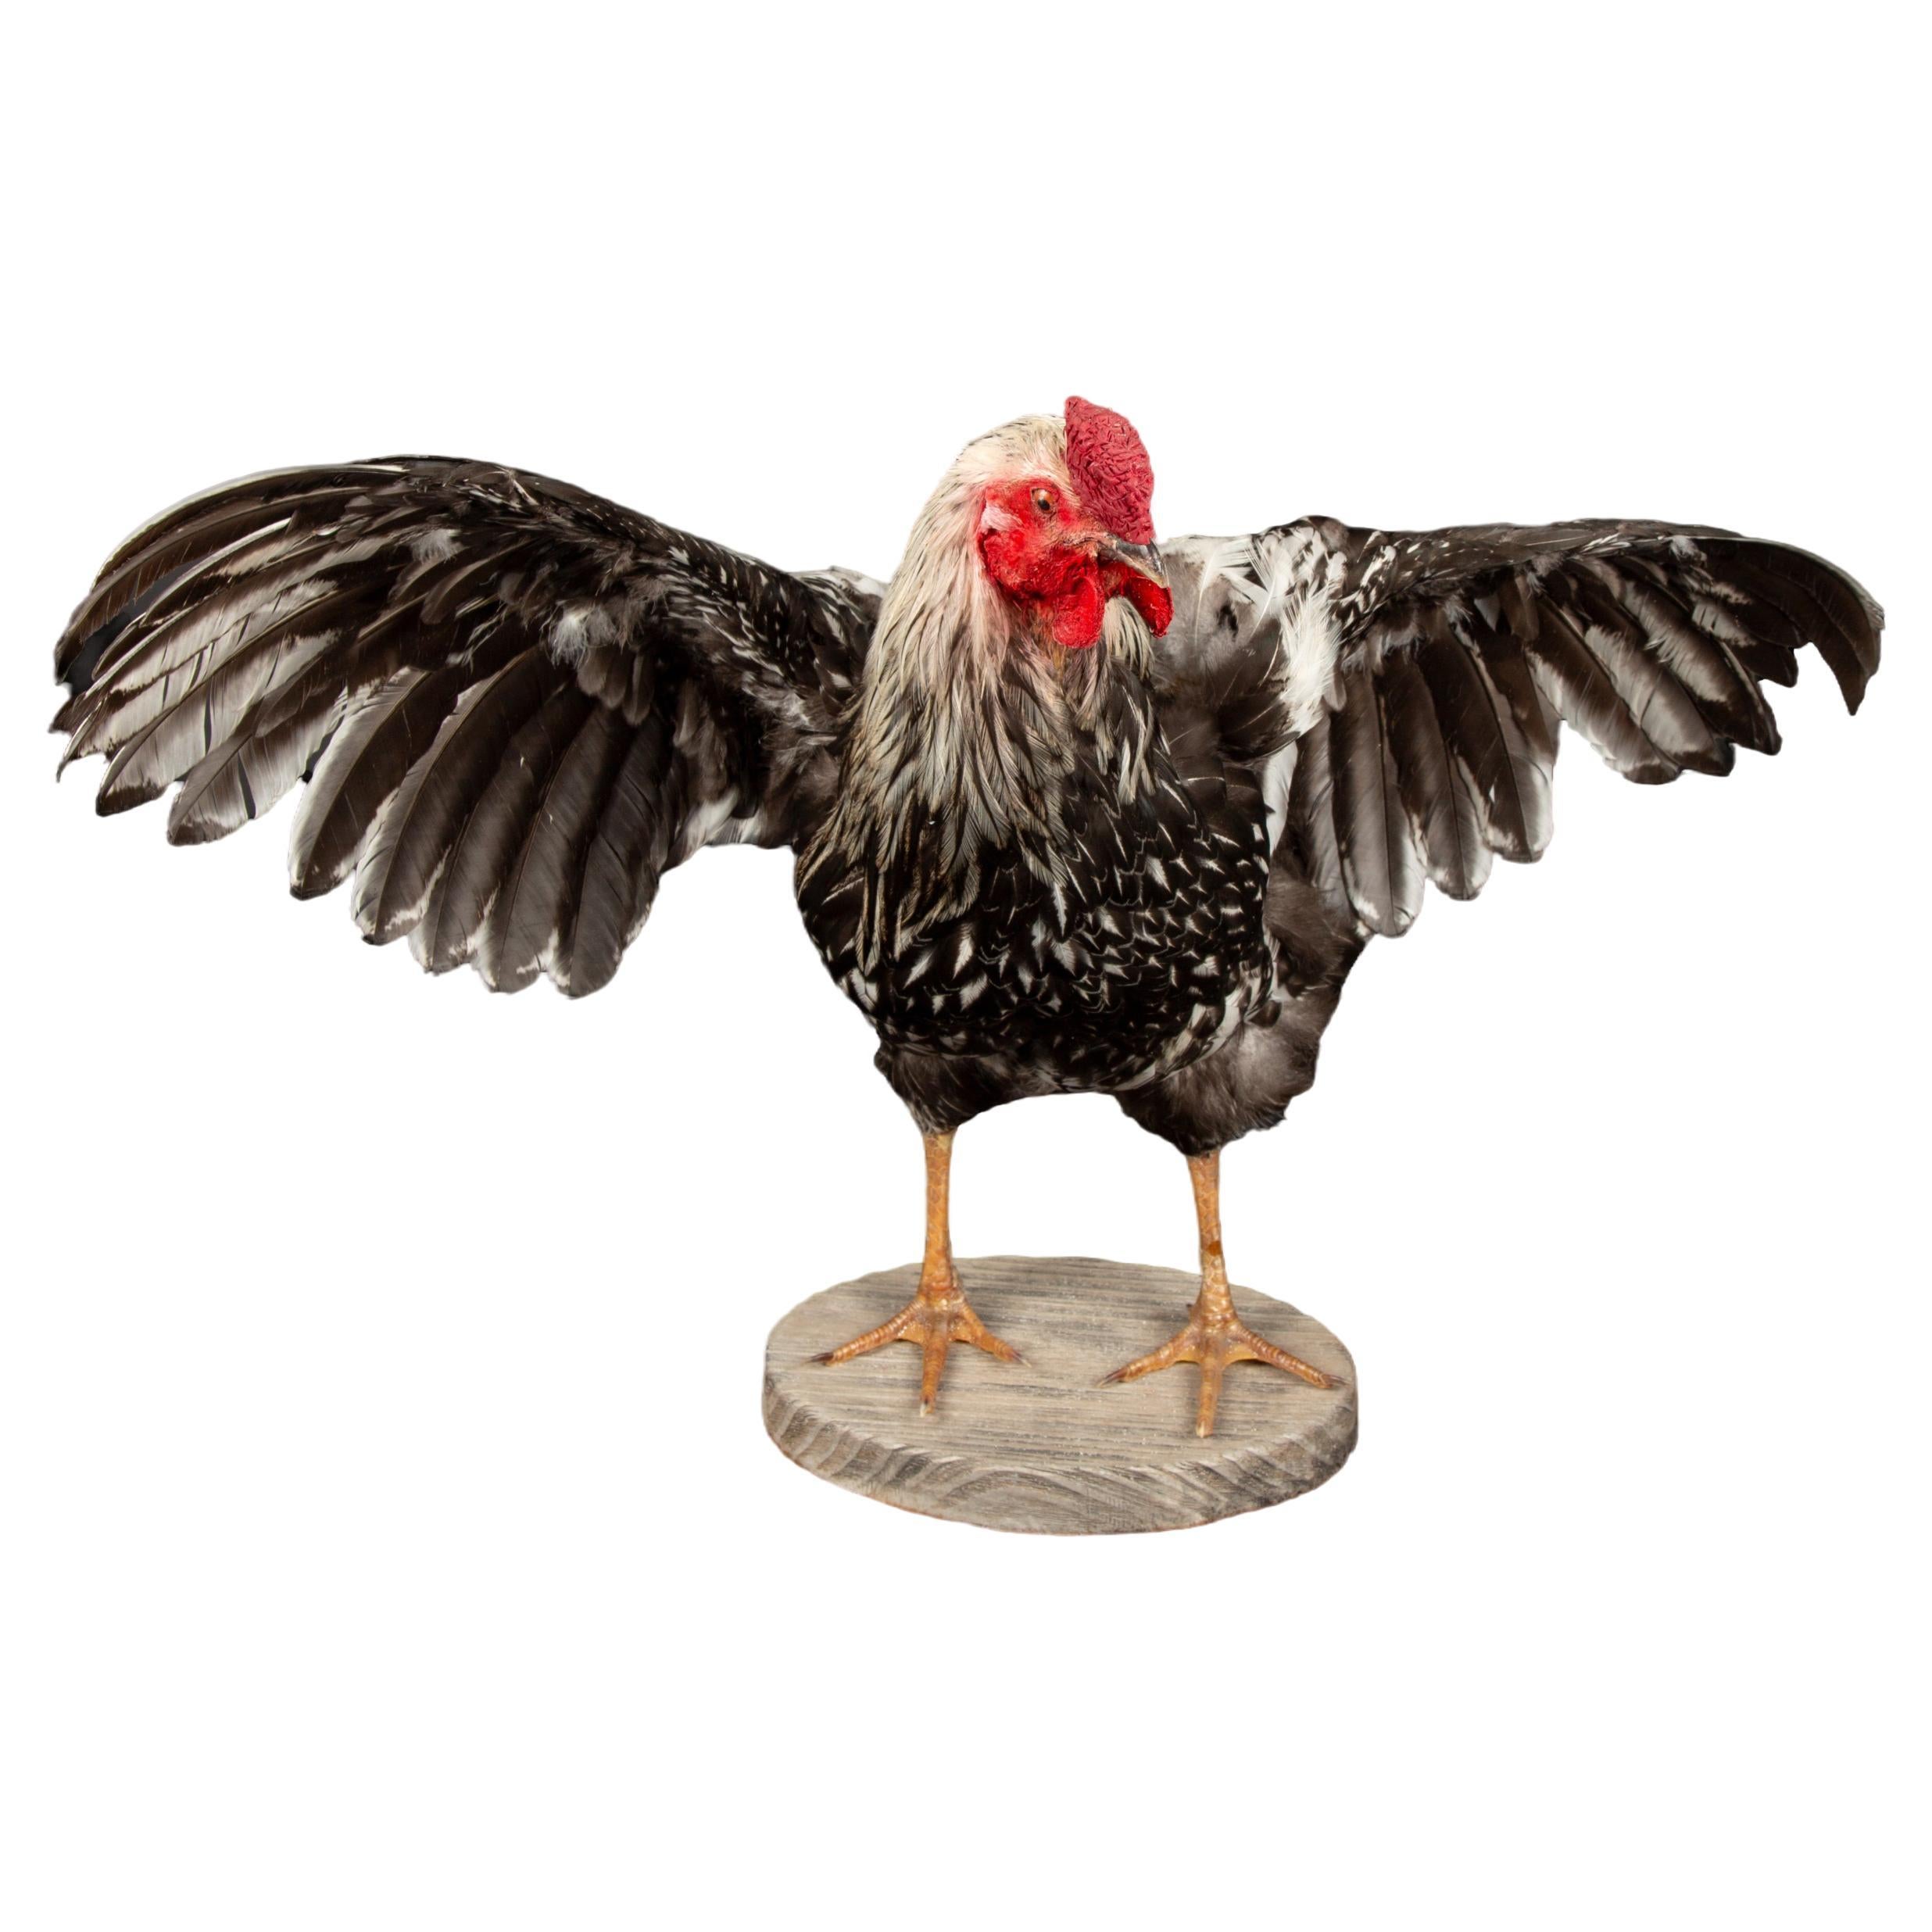 Celebrate American Poultry with this Taxidermy Silver Laced Wyandotte Rooster For Sale